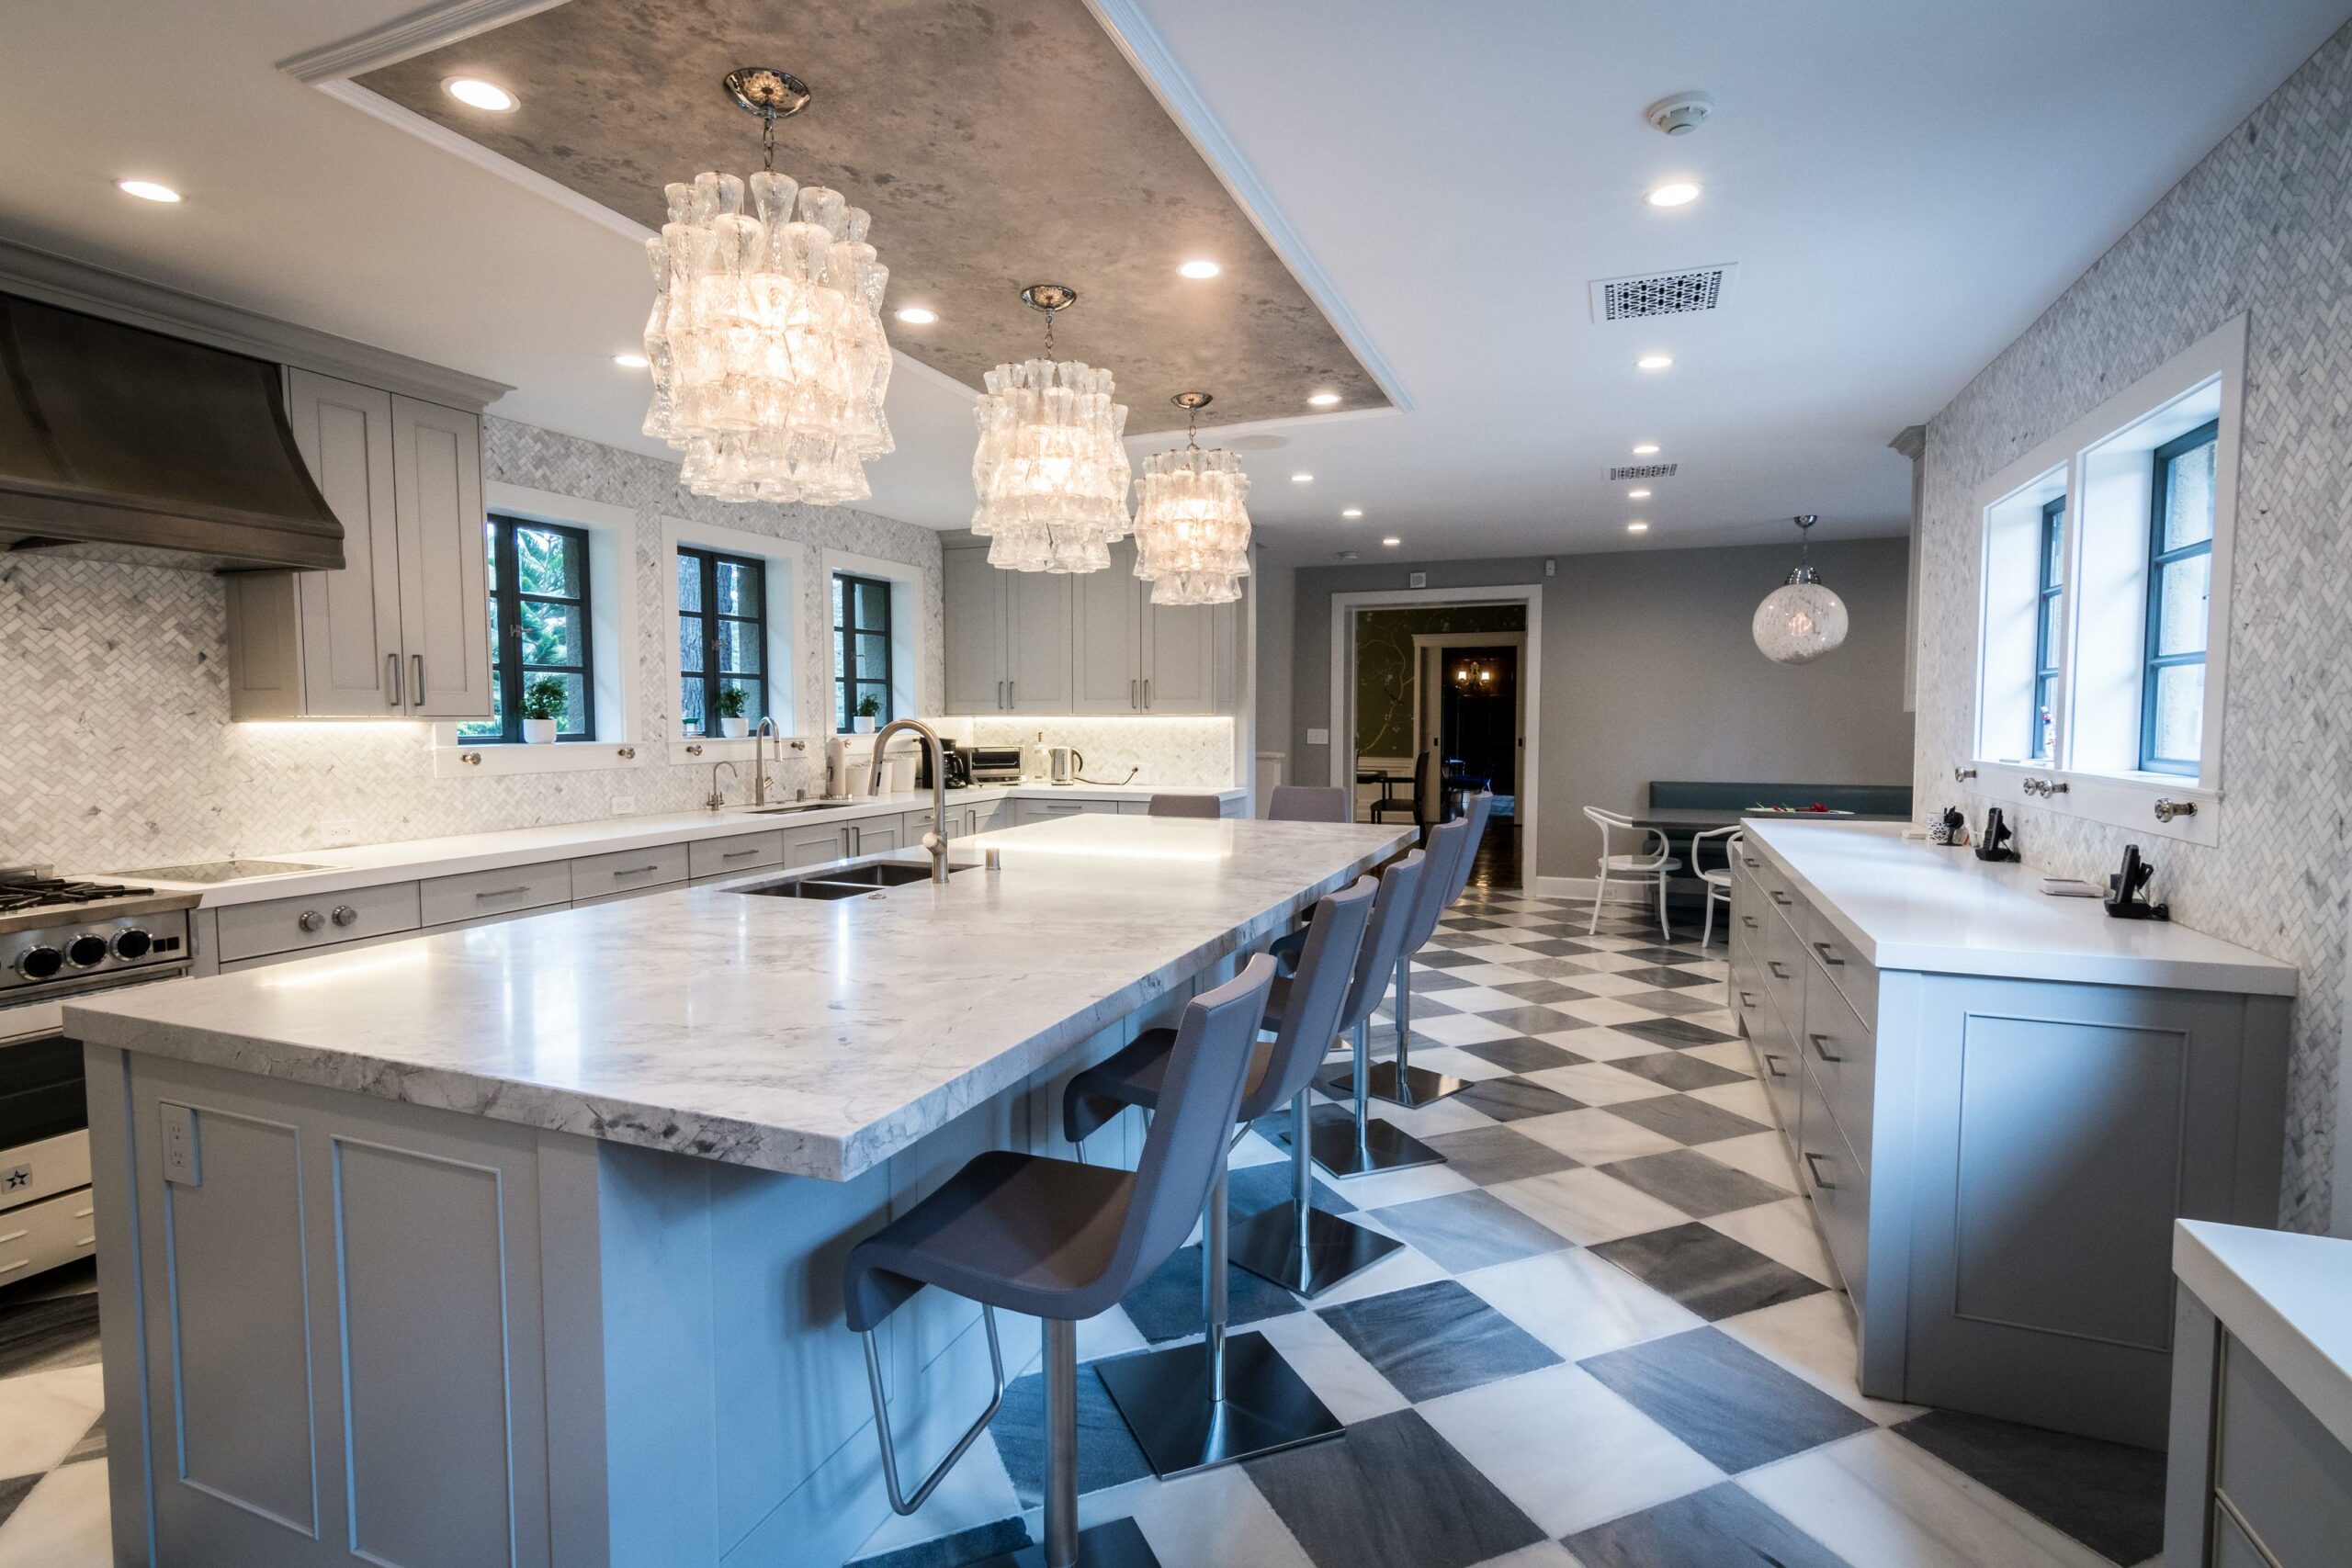 Elegant kitchen with checkered floor and modern lighting fixtures.